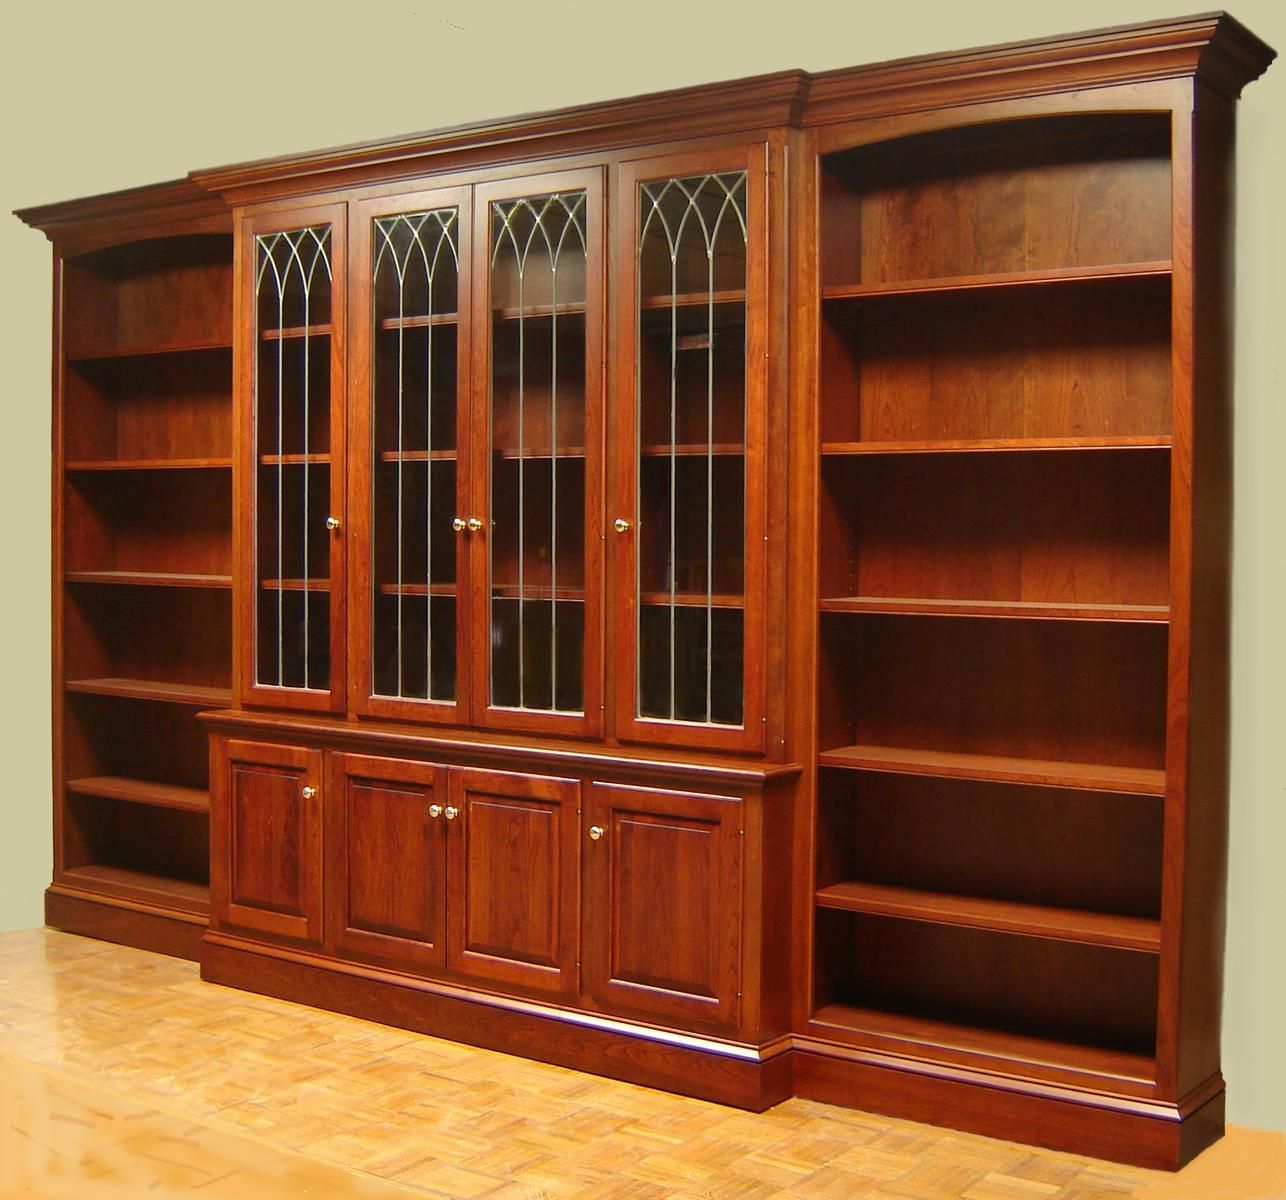 Handmade Cherry Bookcase With Leaded Glass Doors And Open Side Bookcases Odhner & Odhner Fine Woodworking Inc. | Custommade Within Cherry Bookcases (Photo 5 of 15)